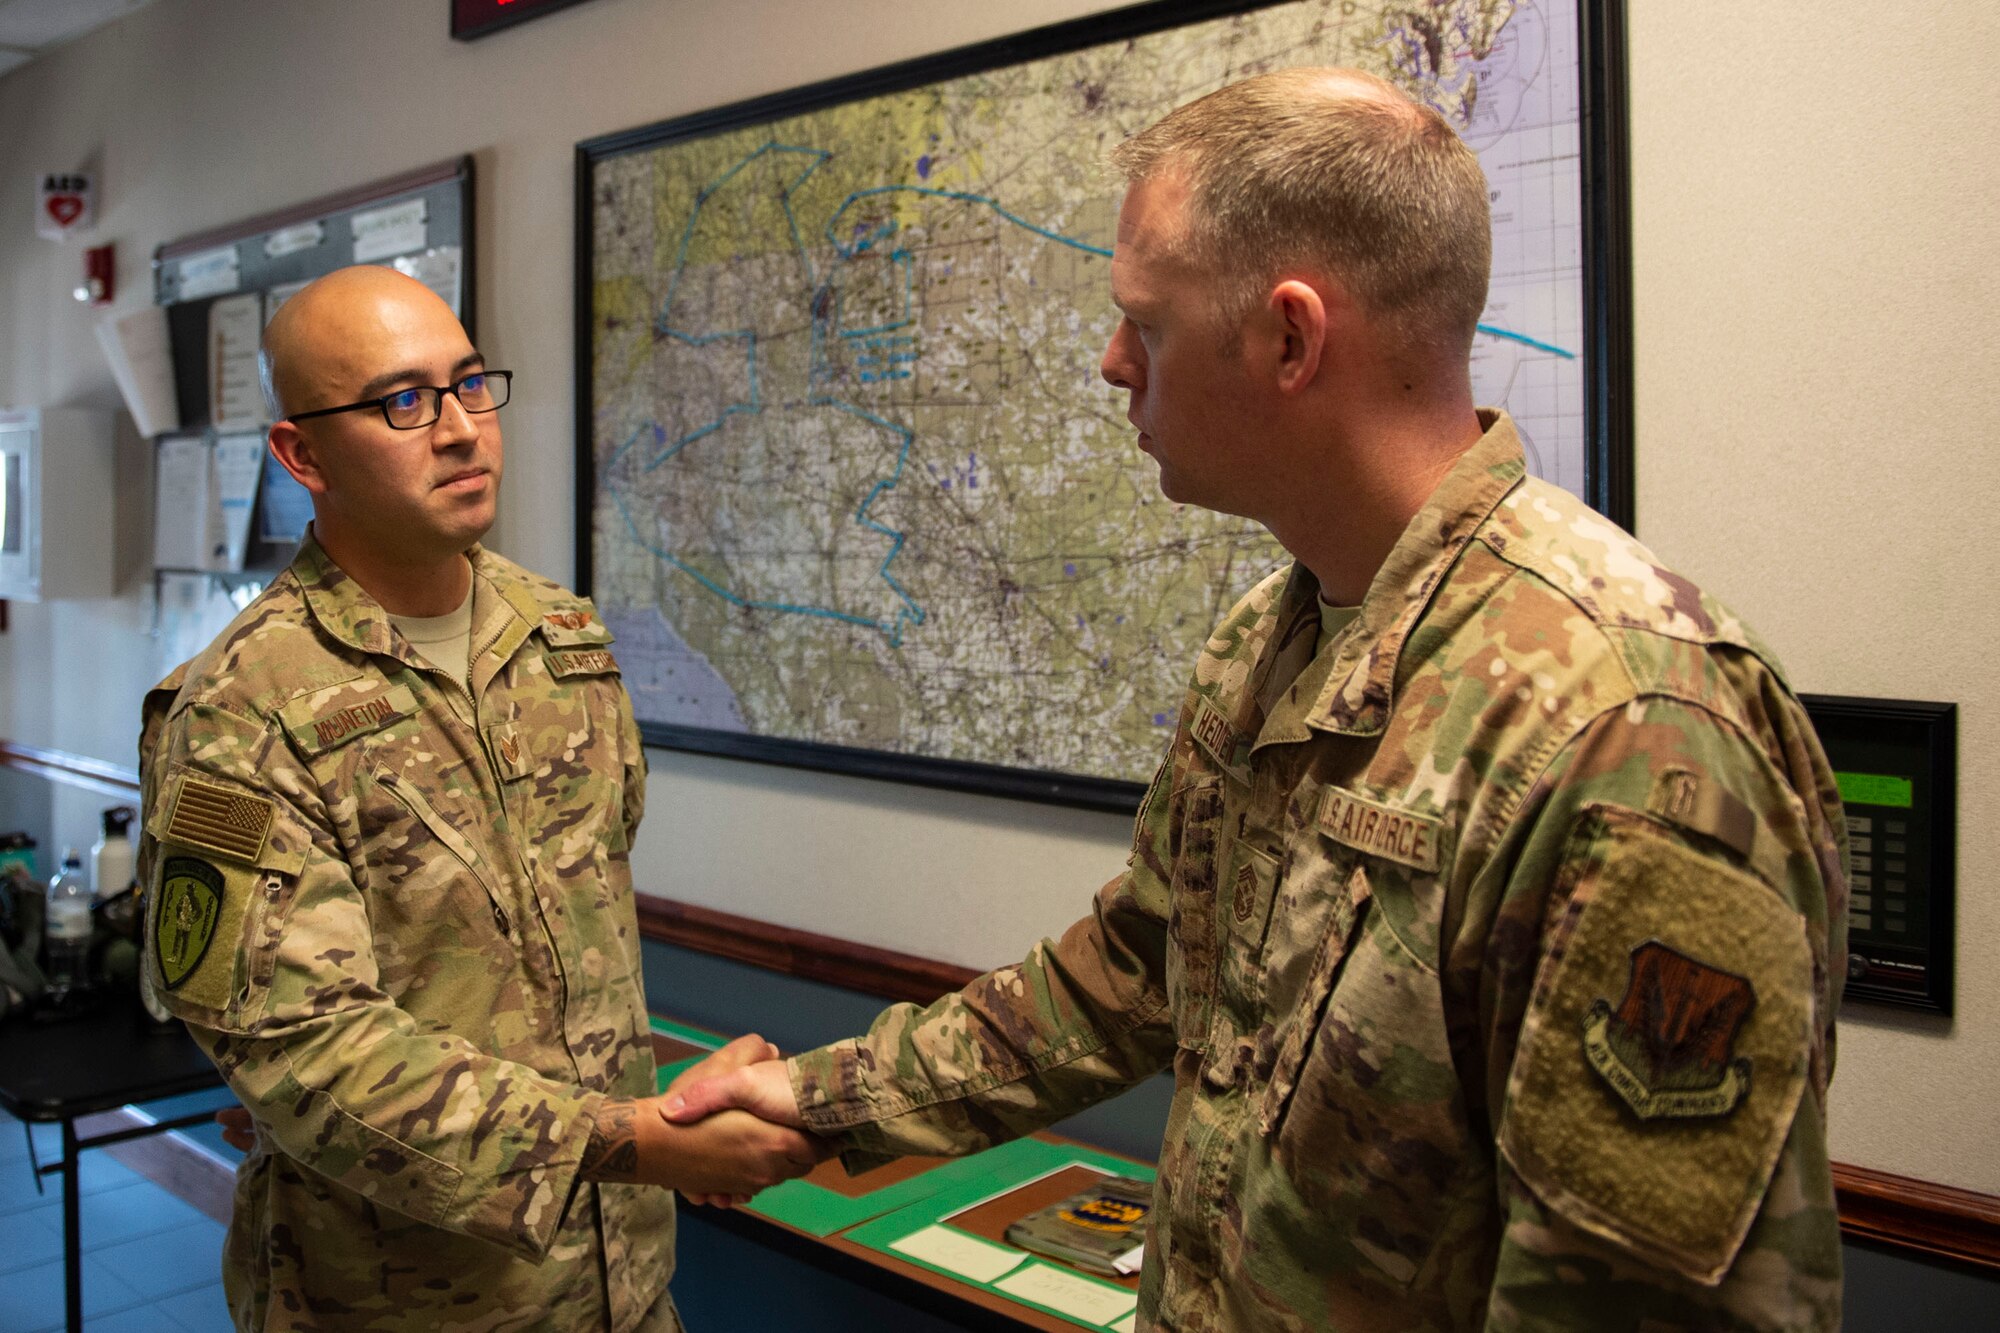 Ninth Air Force Command Chief Master Sgt. Benjamin W. Hedden, right, coins Tech. Sgt. Alvaro Muneton, 41st Rescue Squadron special mission aviator instructor, at Moody Air Force Base, Ga., July 30, 2019. Muneton was recognized for exceeding expectations while executing logistics plans for his unit’s predeployment training.(U.S. Air Force photo by Airman Azaria E. Foster)